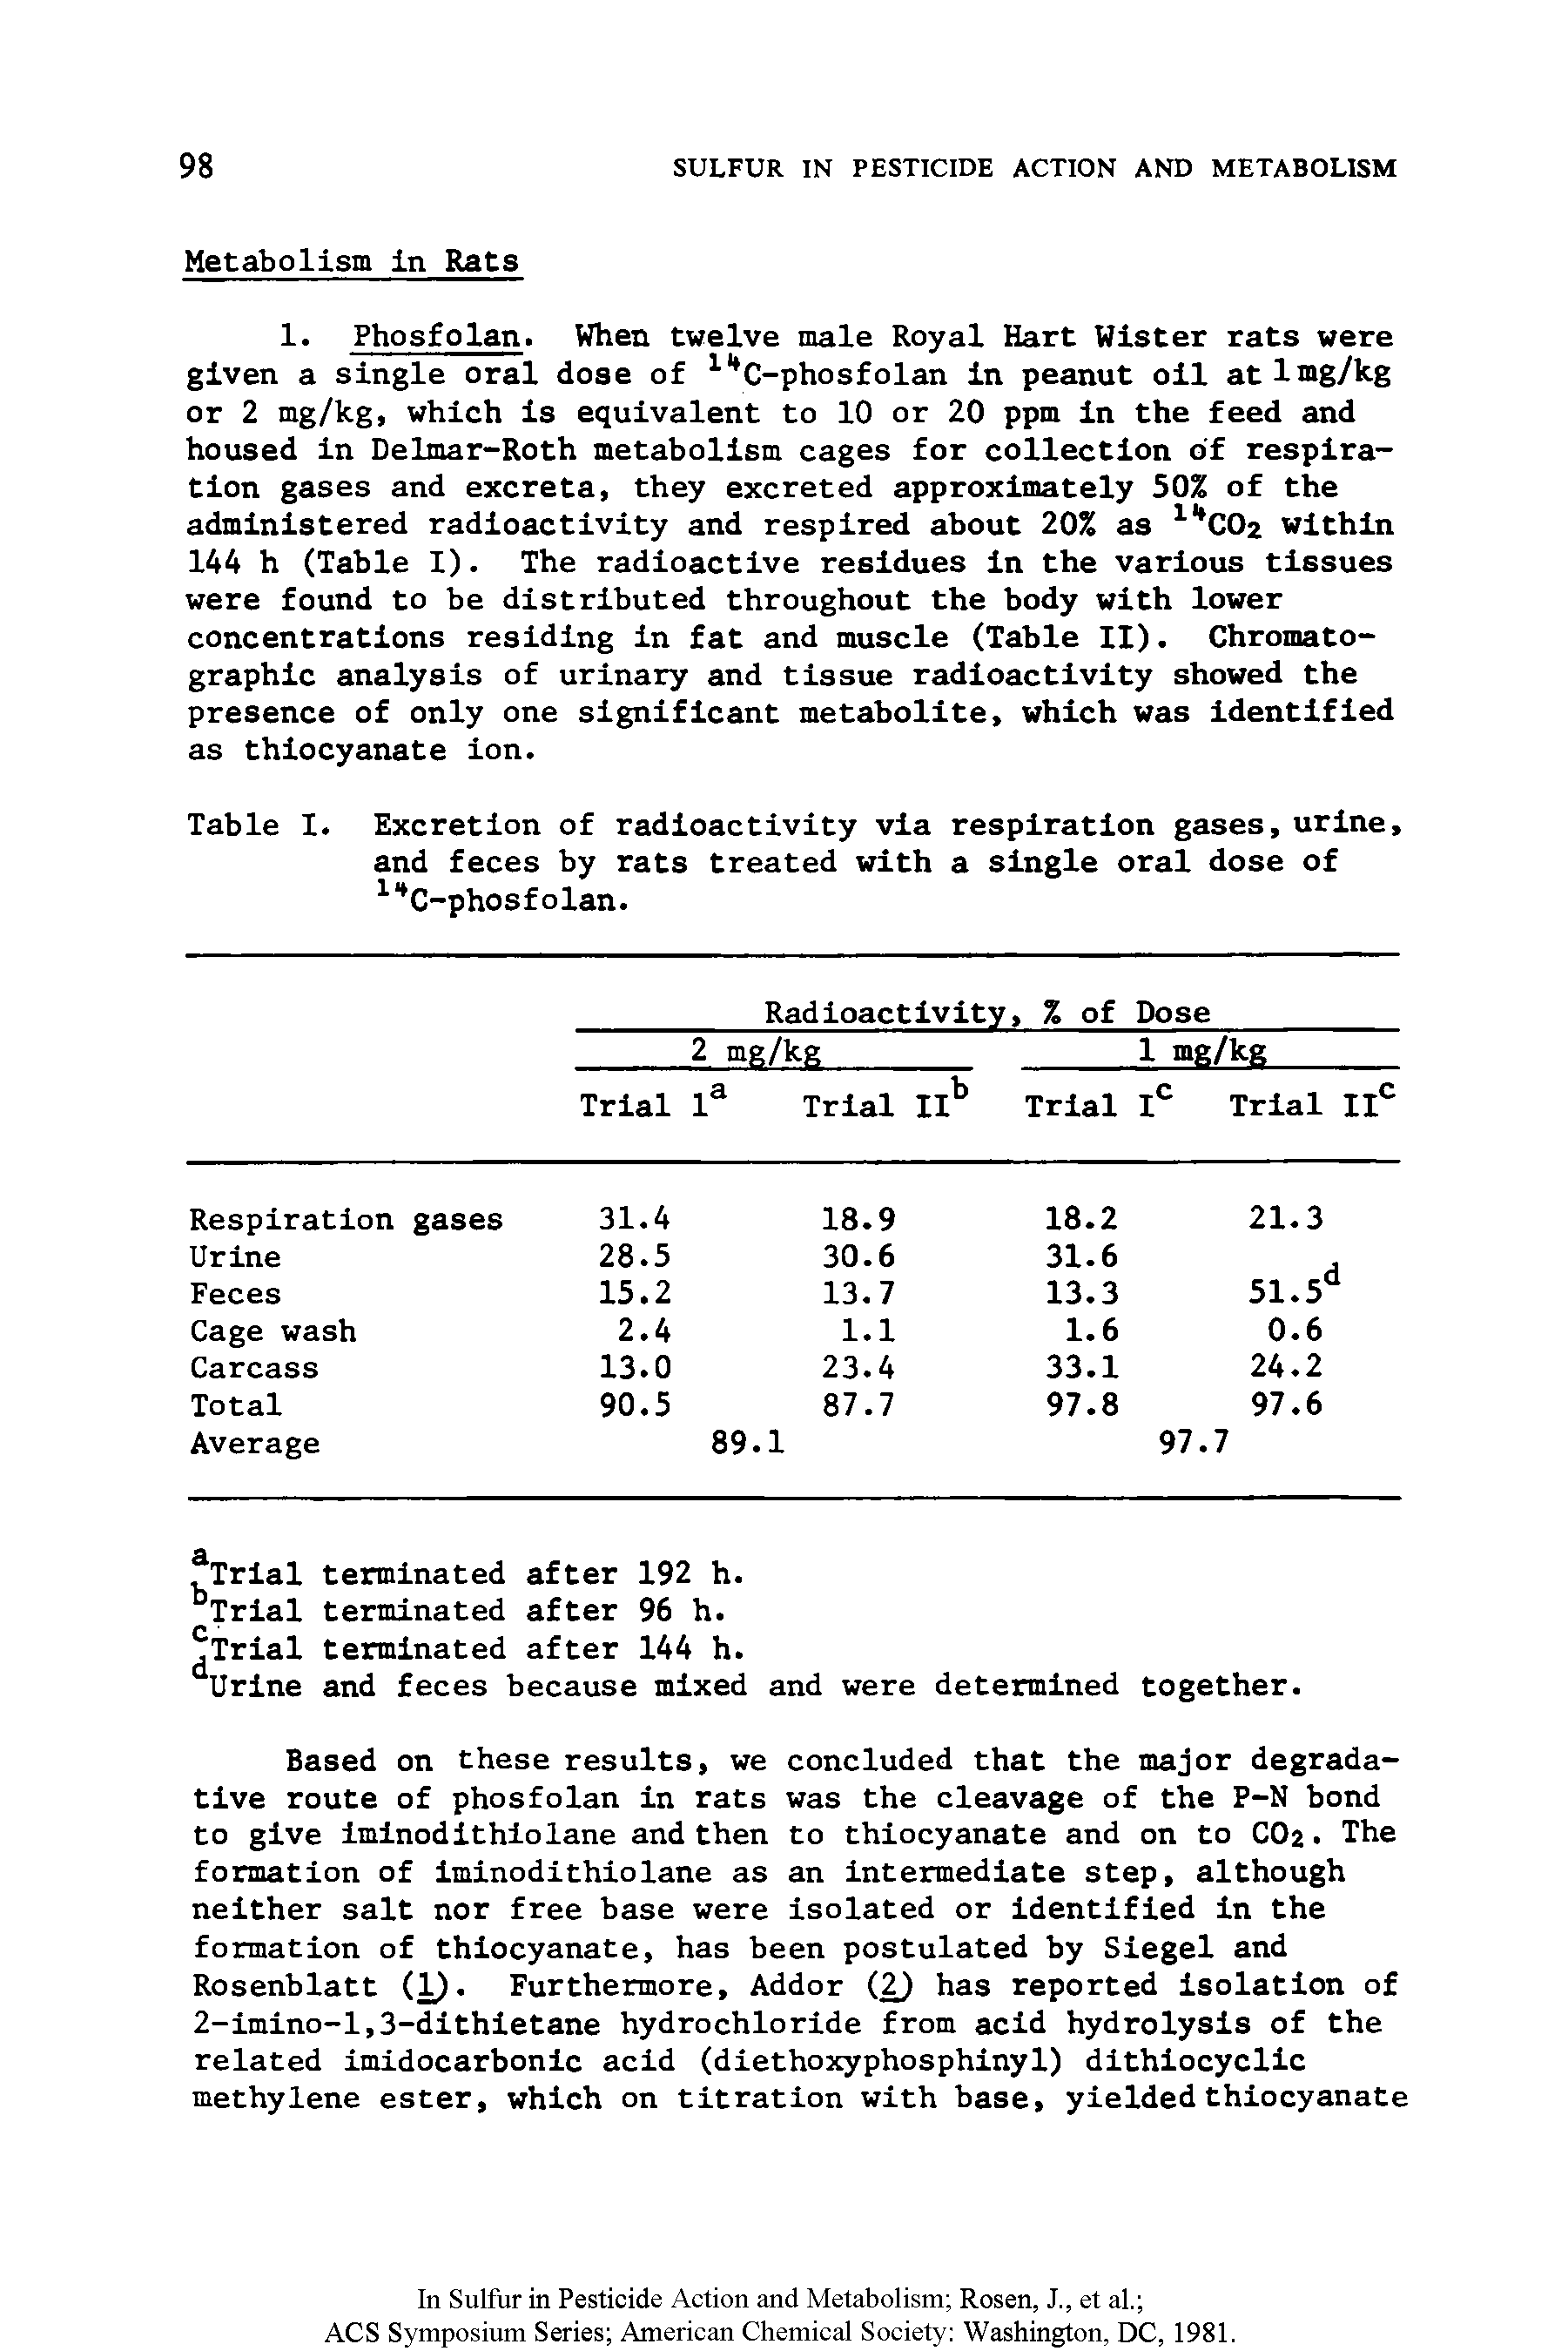 Table I. Excretion of radioactivity via respiration gases, urine, and feces by rats treated with a single oral dose of C-phosfolan.